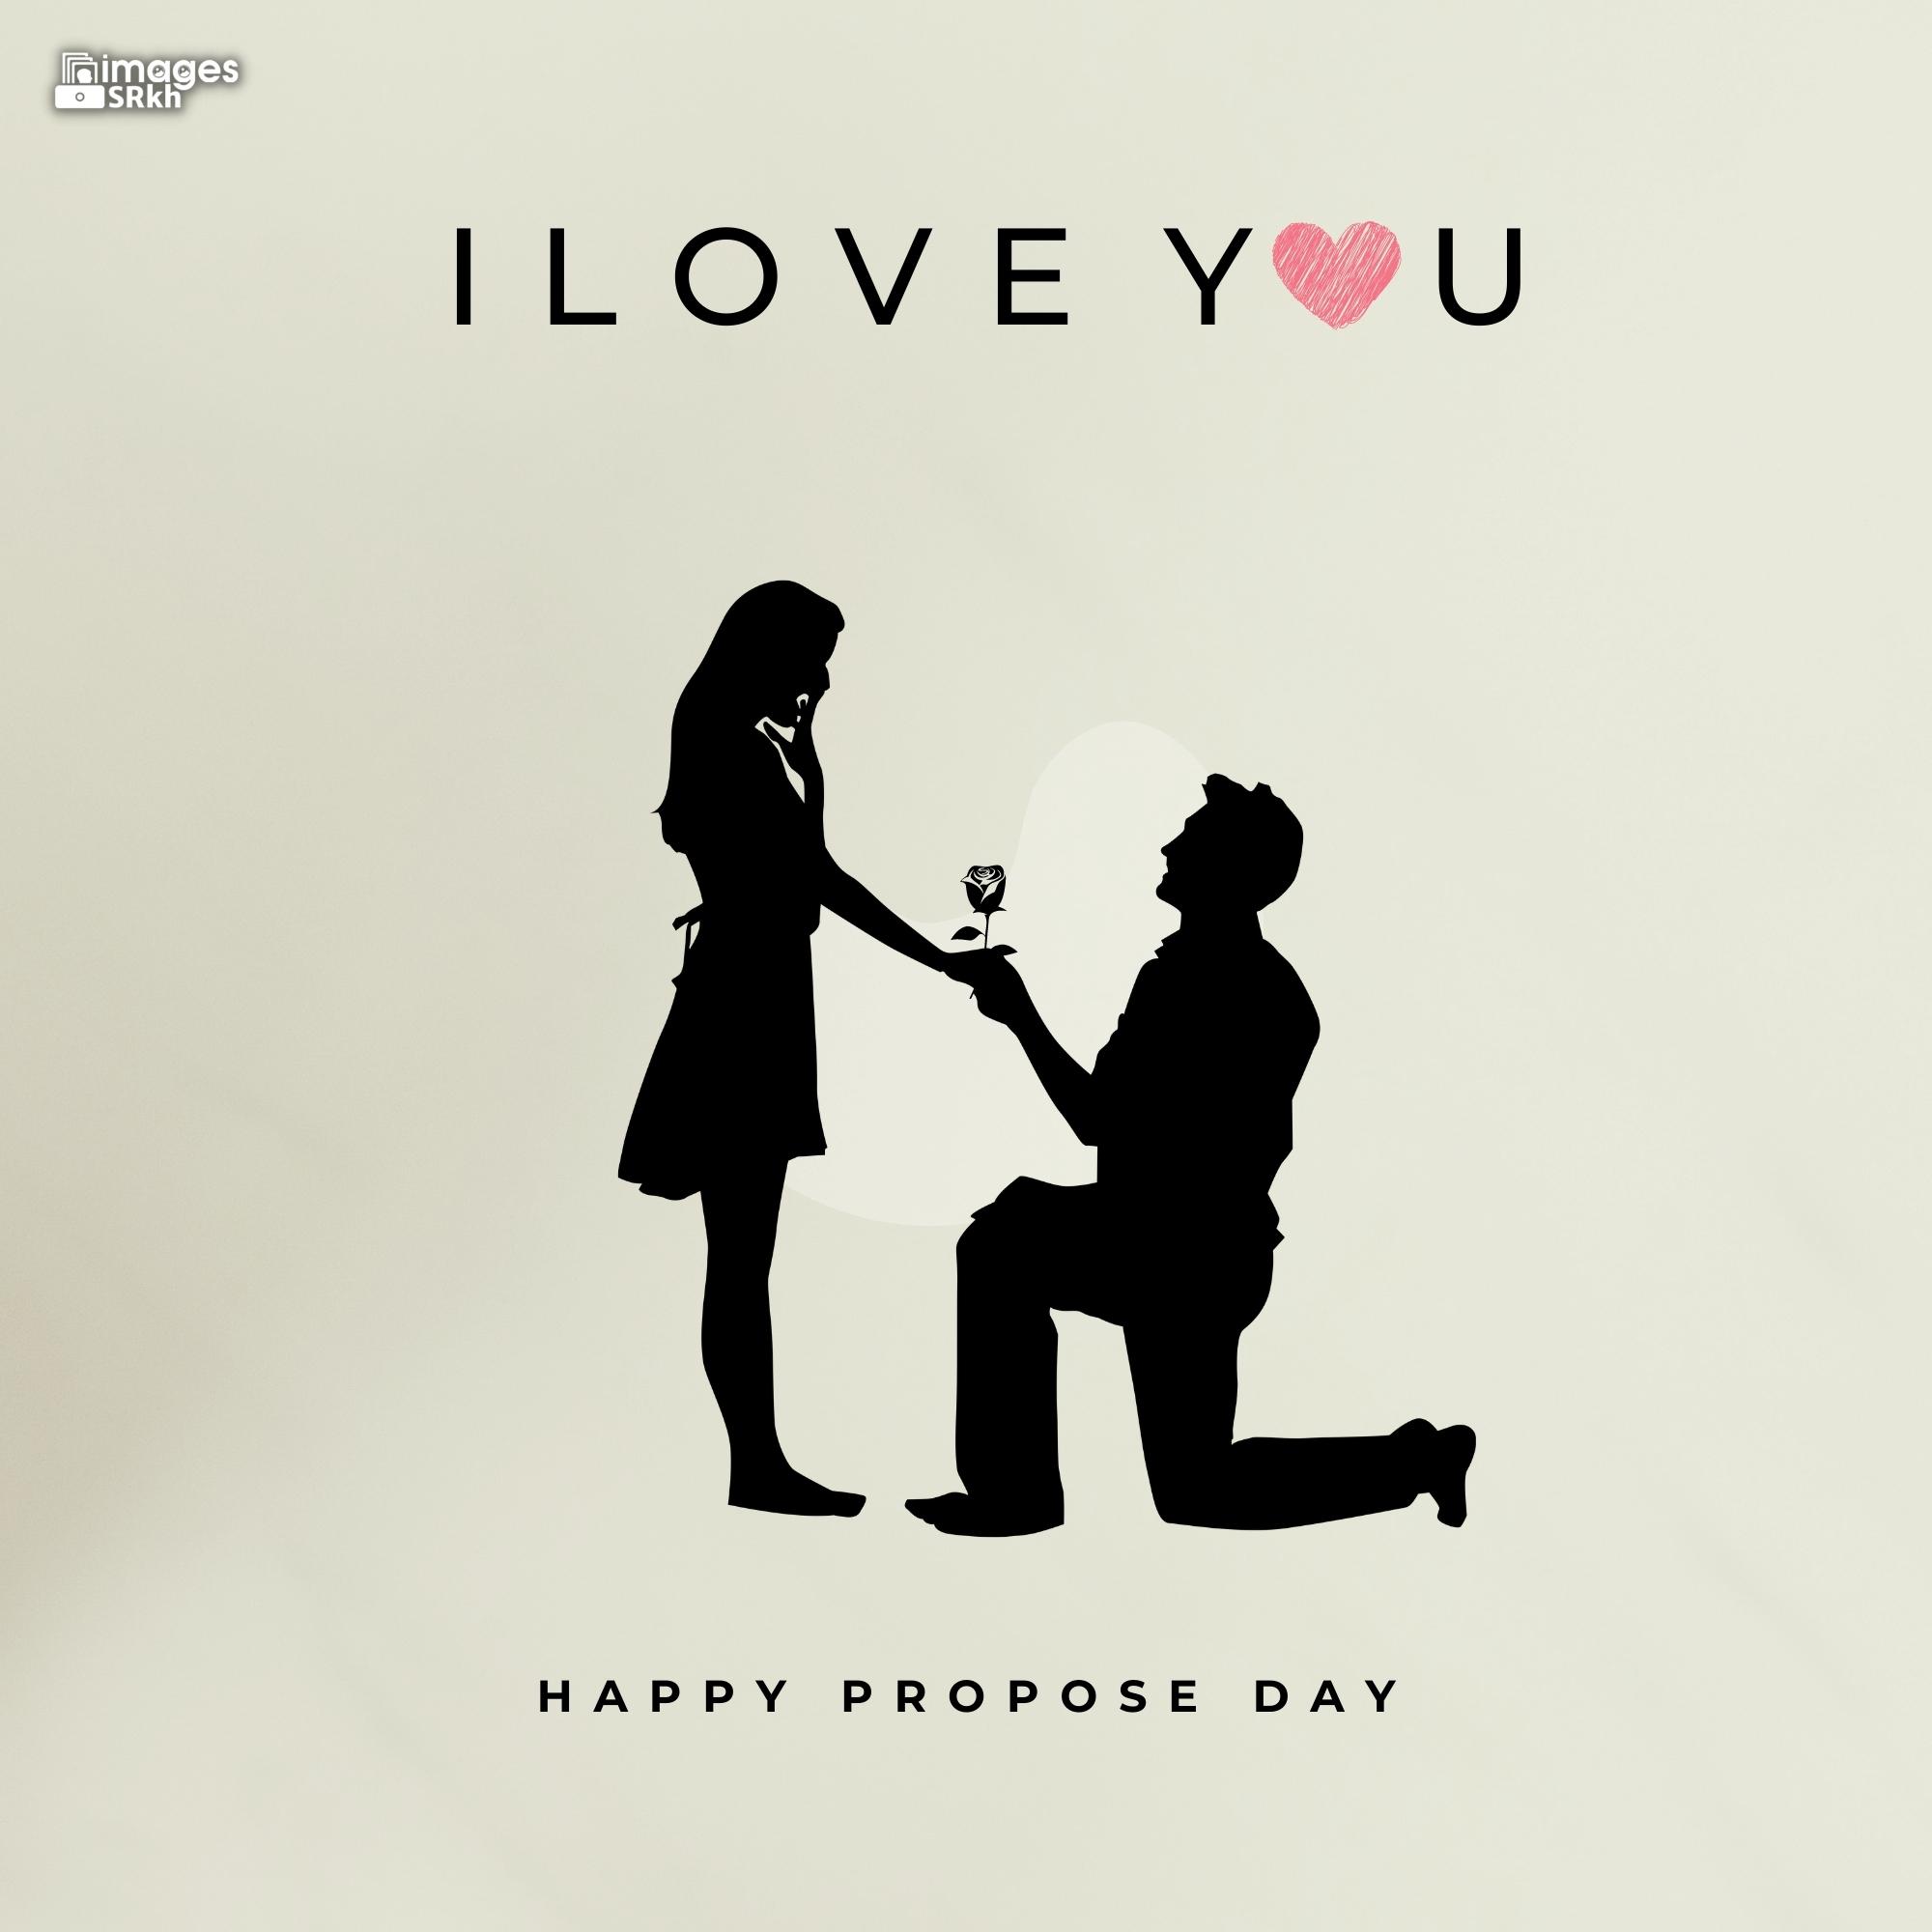 Happy Propose Day Images | 368 | I LOVE YOU